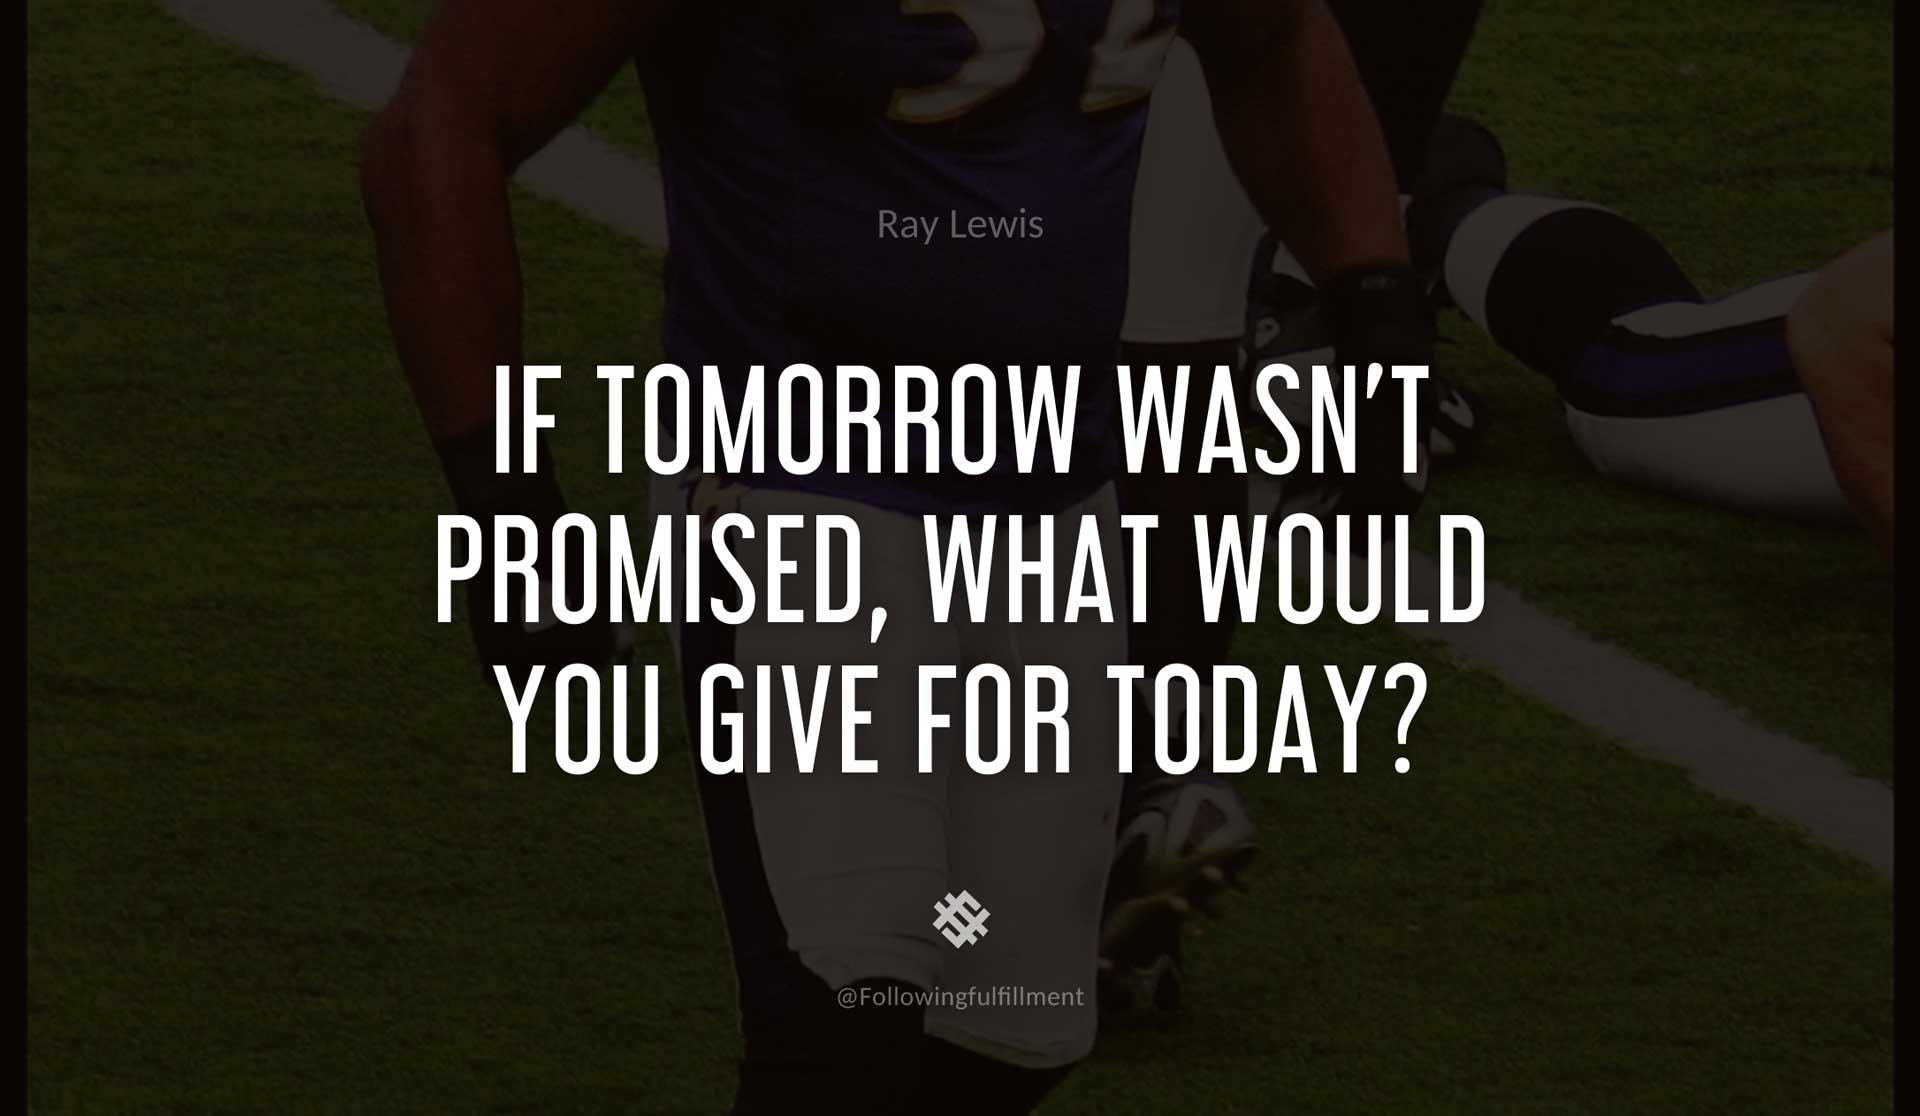 If-tomorrow-wasn't-promised,-what-would-you-give-for-today--RAY-LEWIS-Quote.jpg